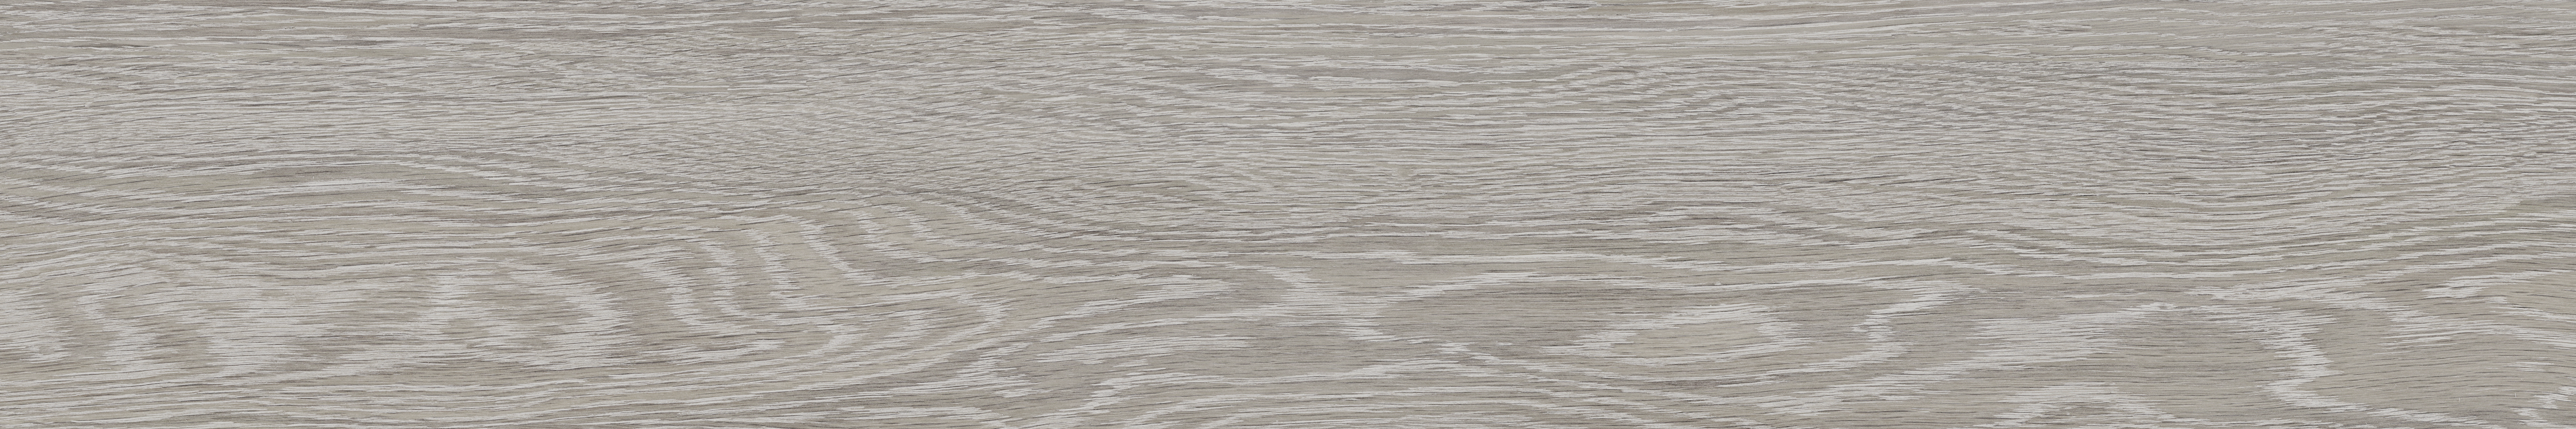 beachcomber pattern glazed porcelain field tile from aspen anatolia collection distributed by surface group international matte finish rectified edge 6x36 rectangle shape